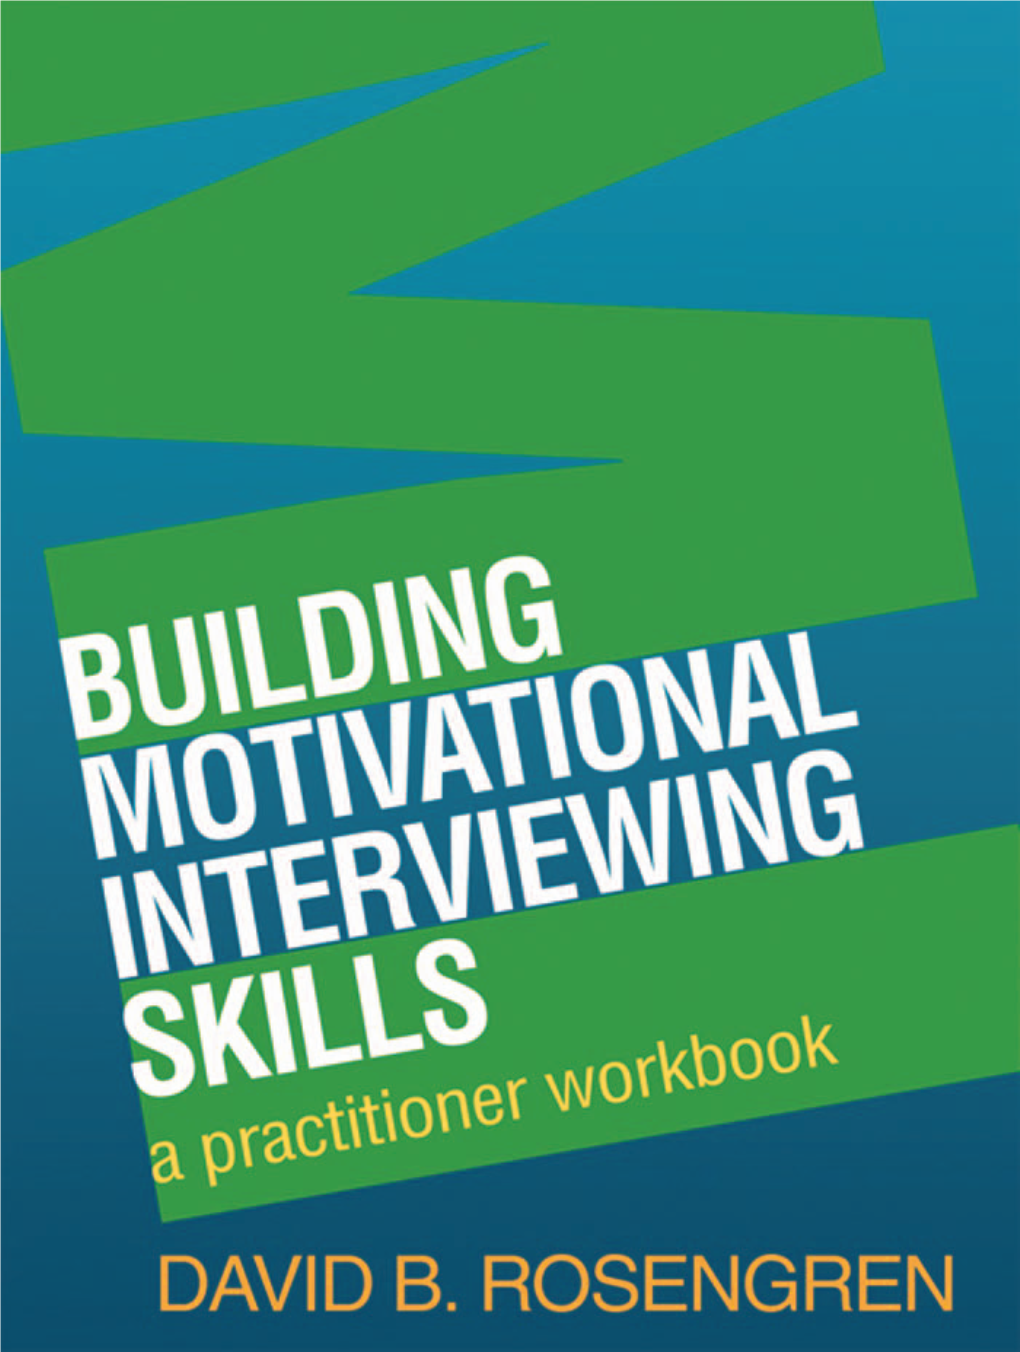 Building Motivational Interviewing Skills Applications of Motivational Interviewing Stephen Rollnick and William R